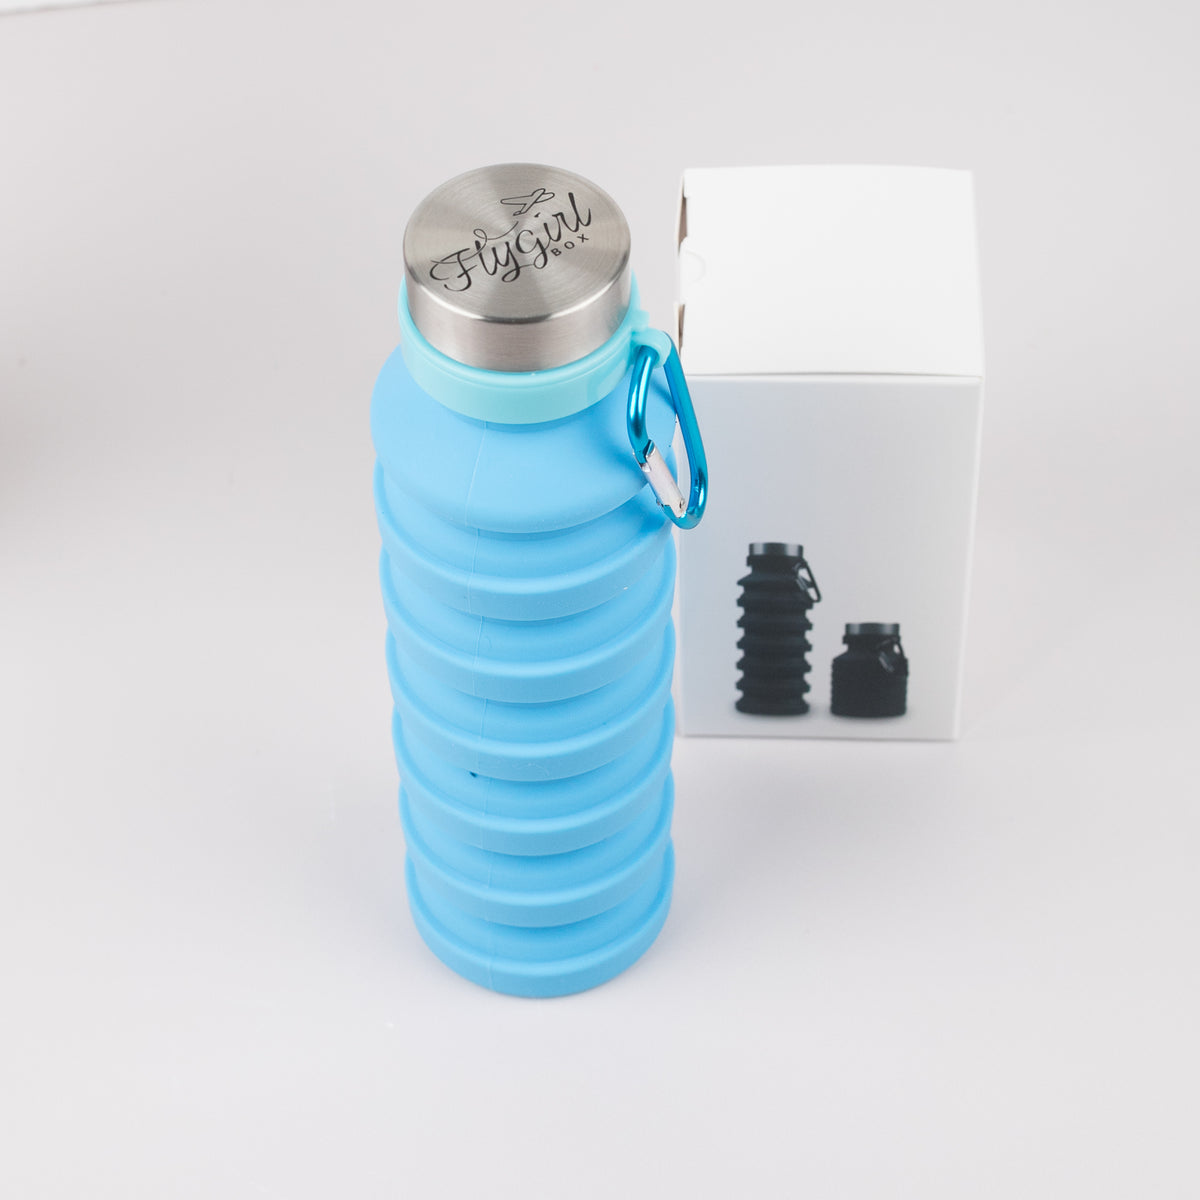 Collapsible Silicone Water Bottle - The Fit Frontier